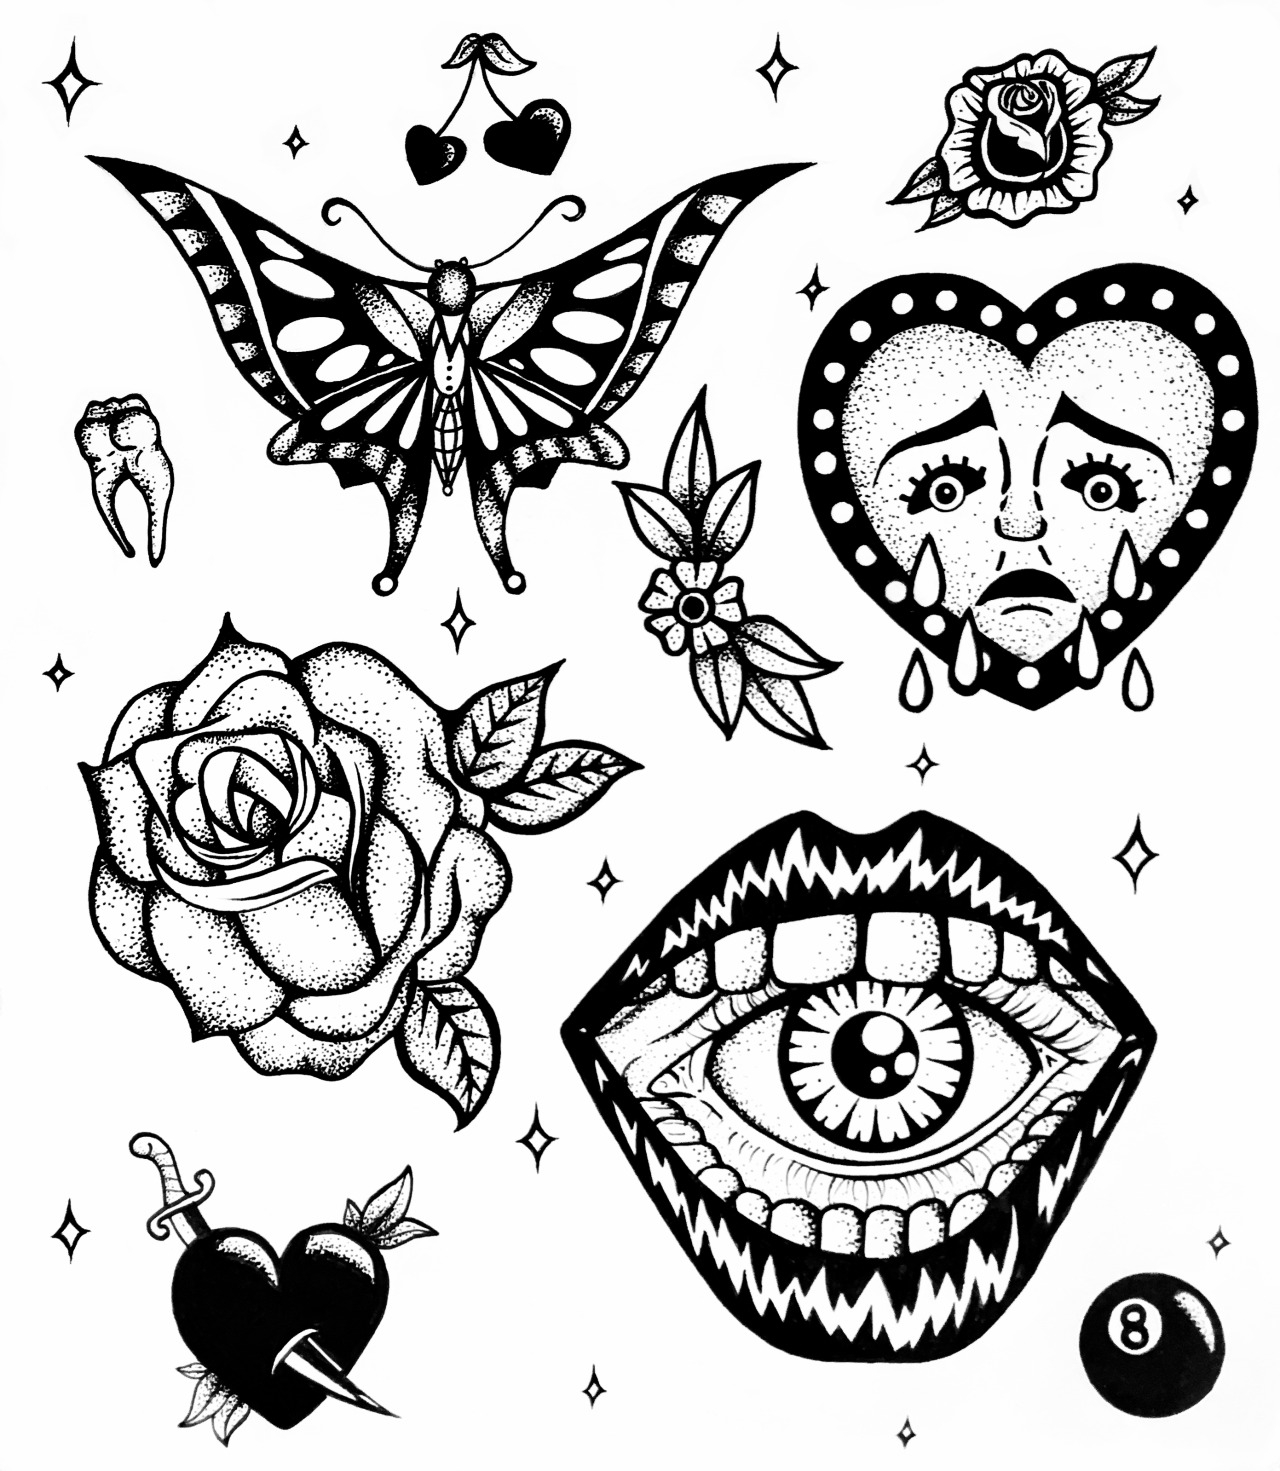 Tattoo Flash Sheet Photographic Prints for Sale  Redbubble